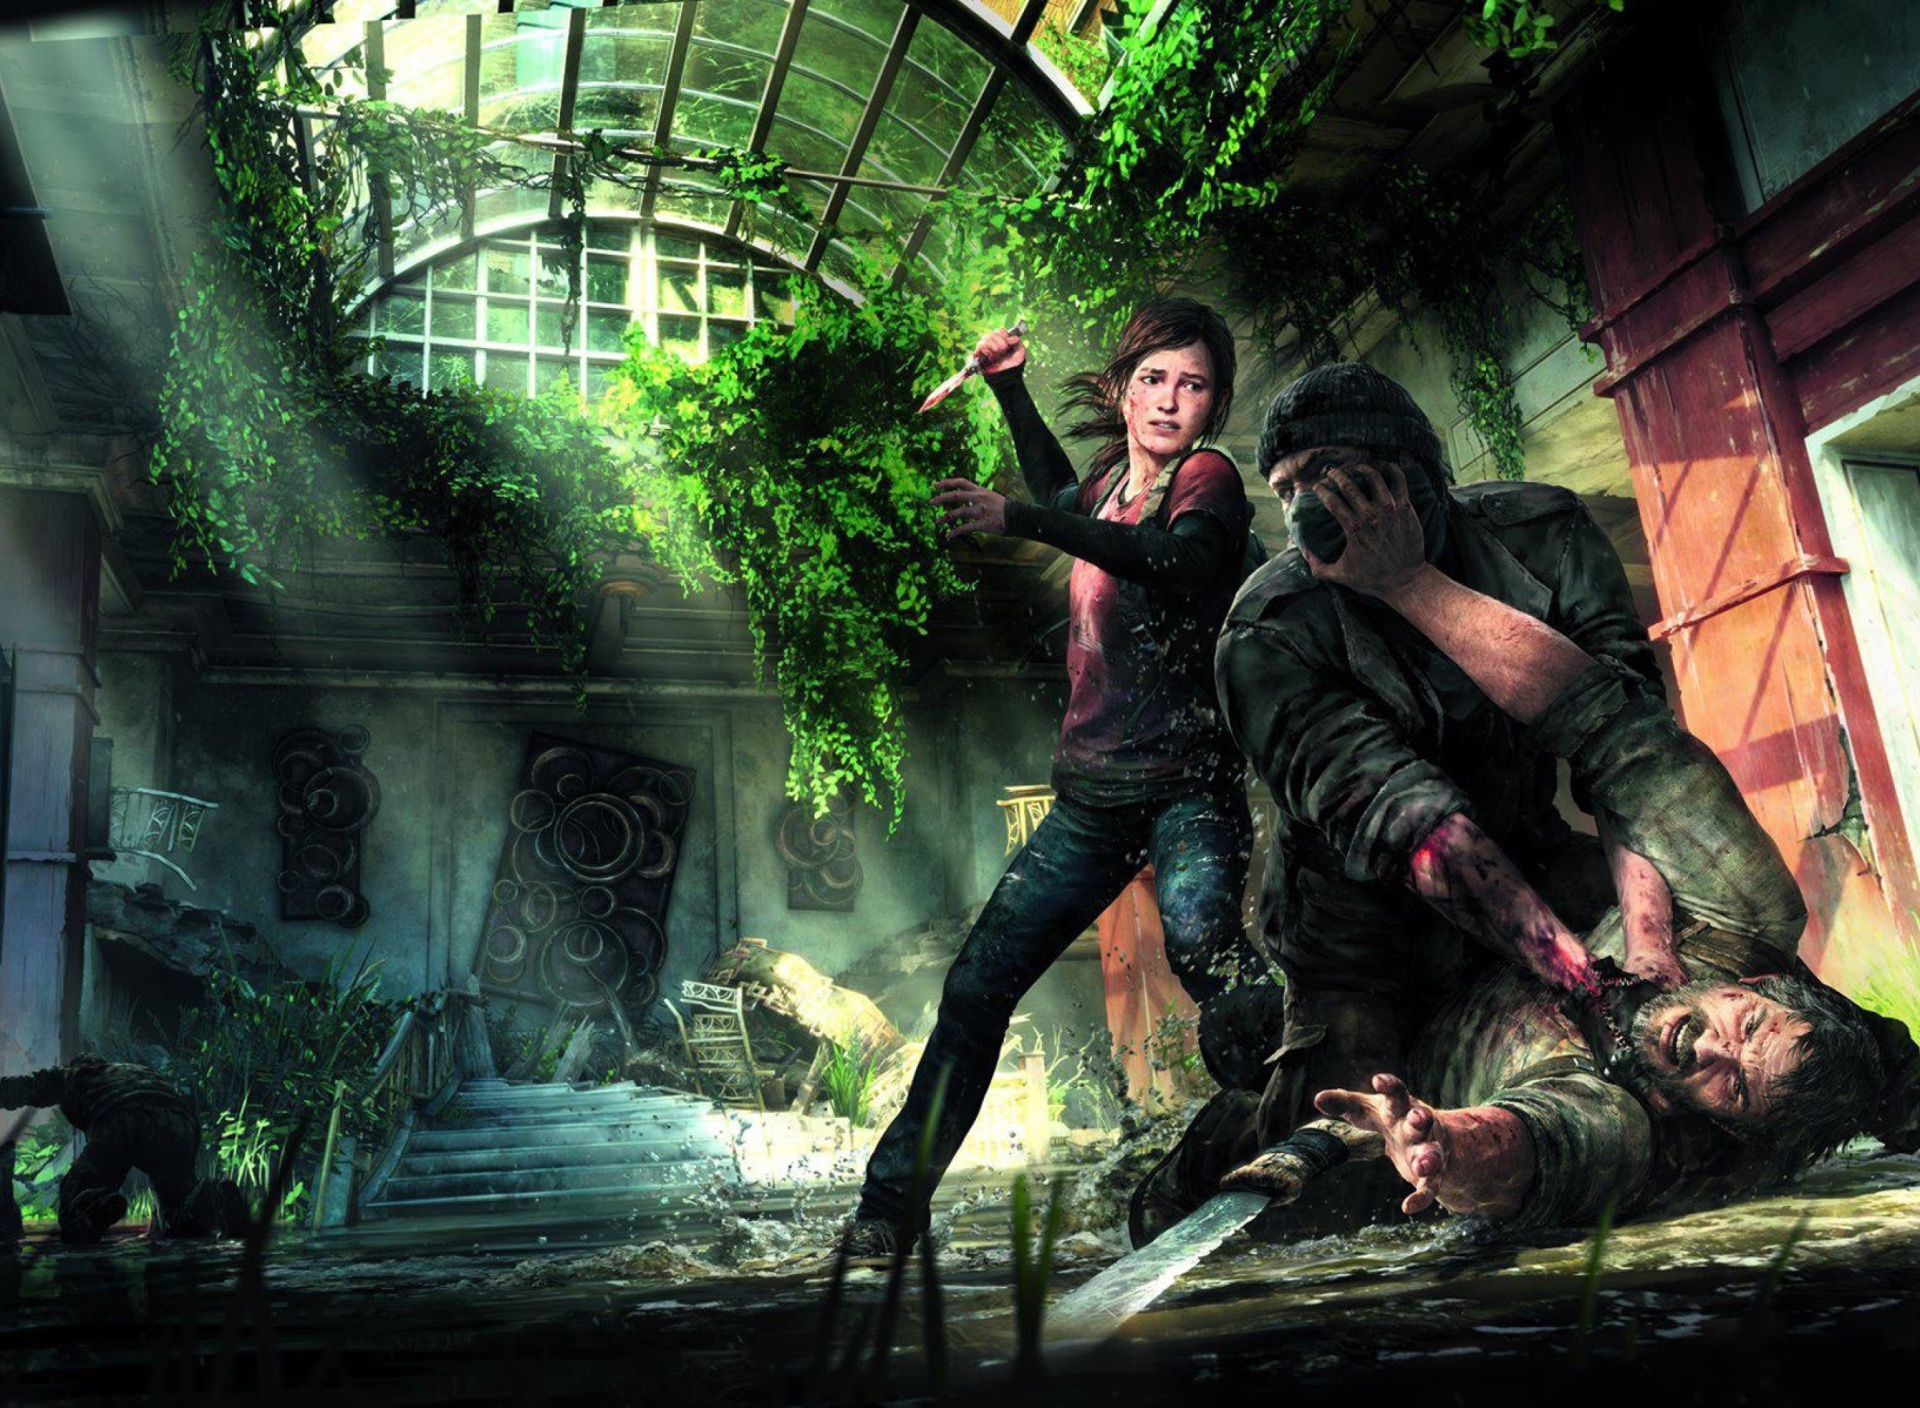 The Last Of Us Naughty Dog for Playstation 3 screenshot #1 1920x1408